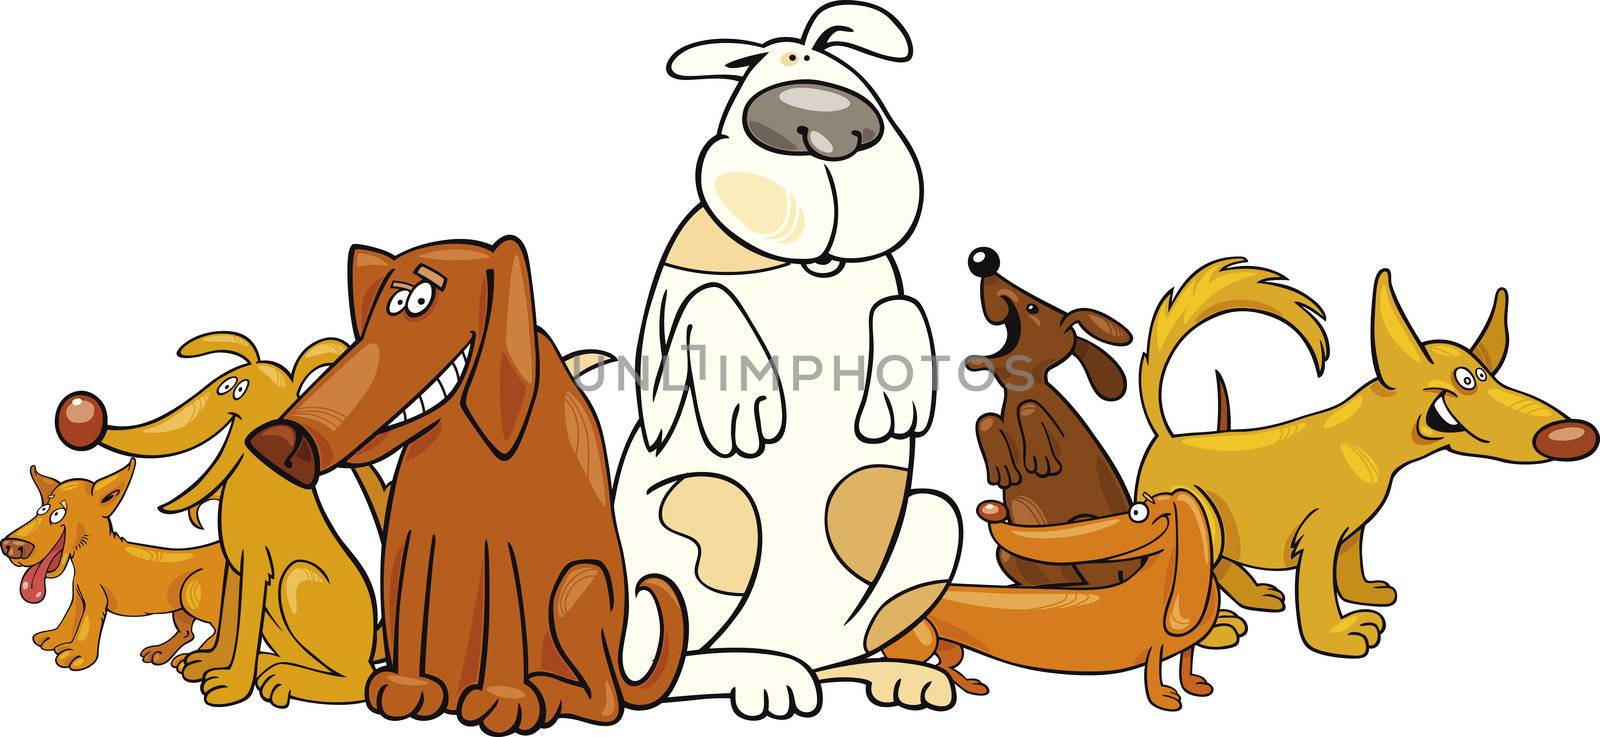 Cartoon illustration of funny dogs group